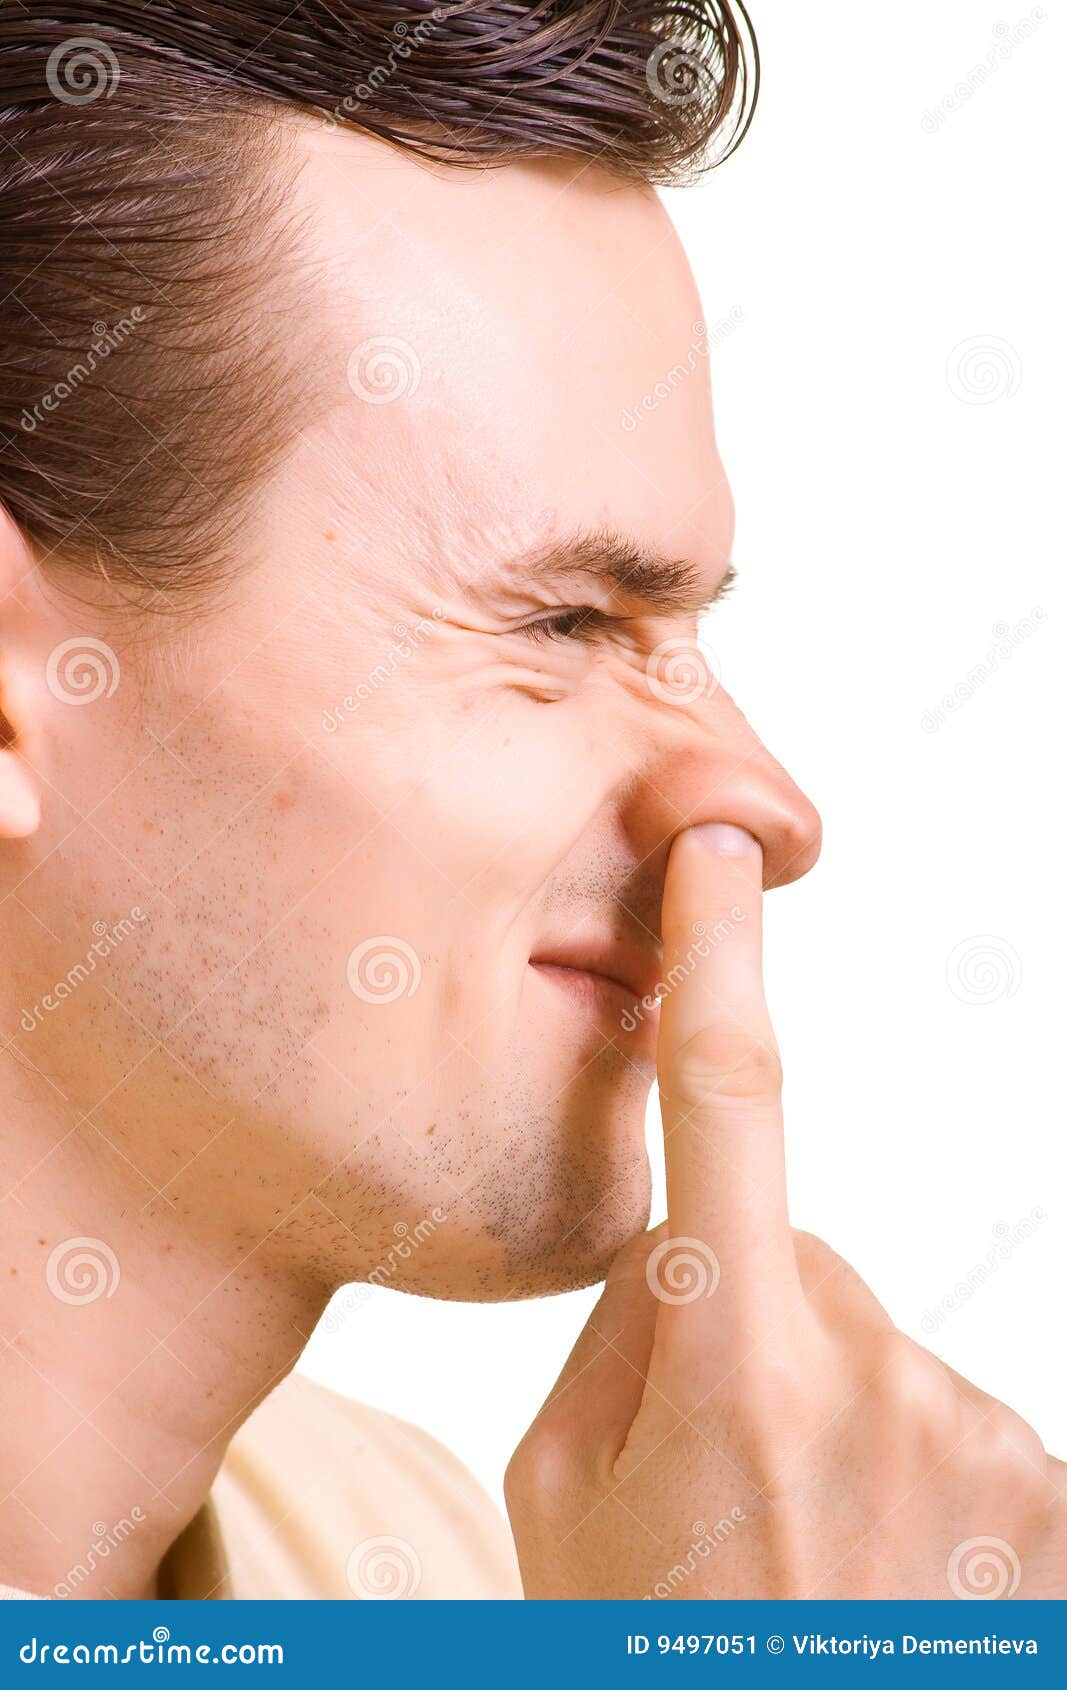 Men Has Thrust a Finger in the Nose Stock Image - Image of portrait